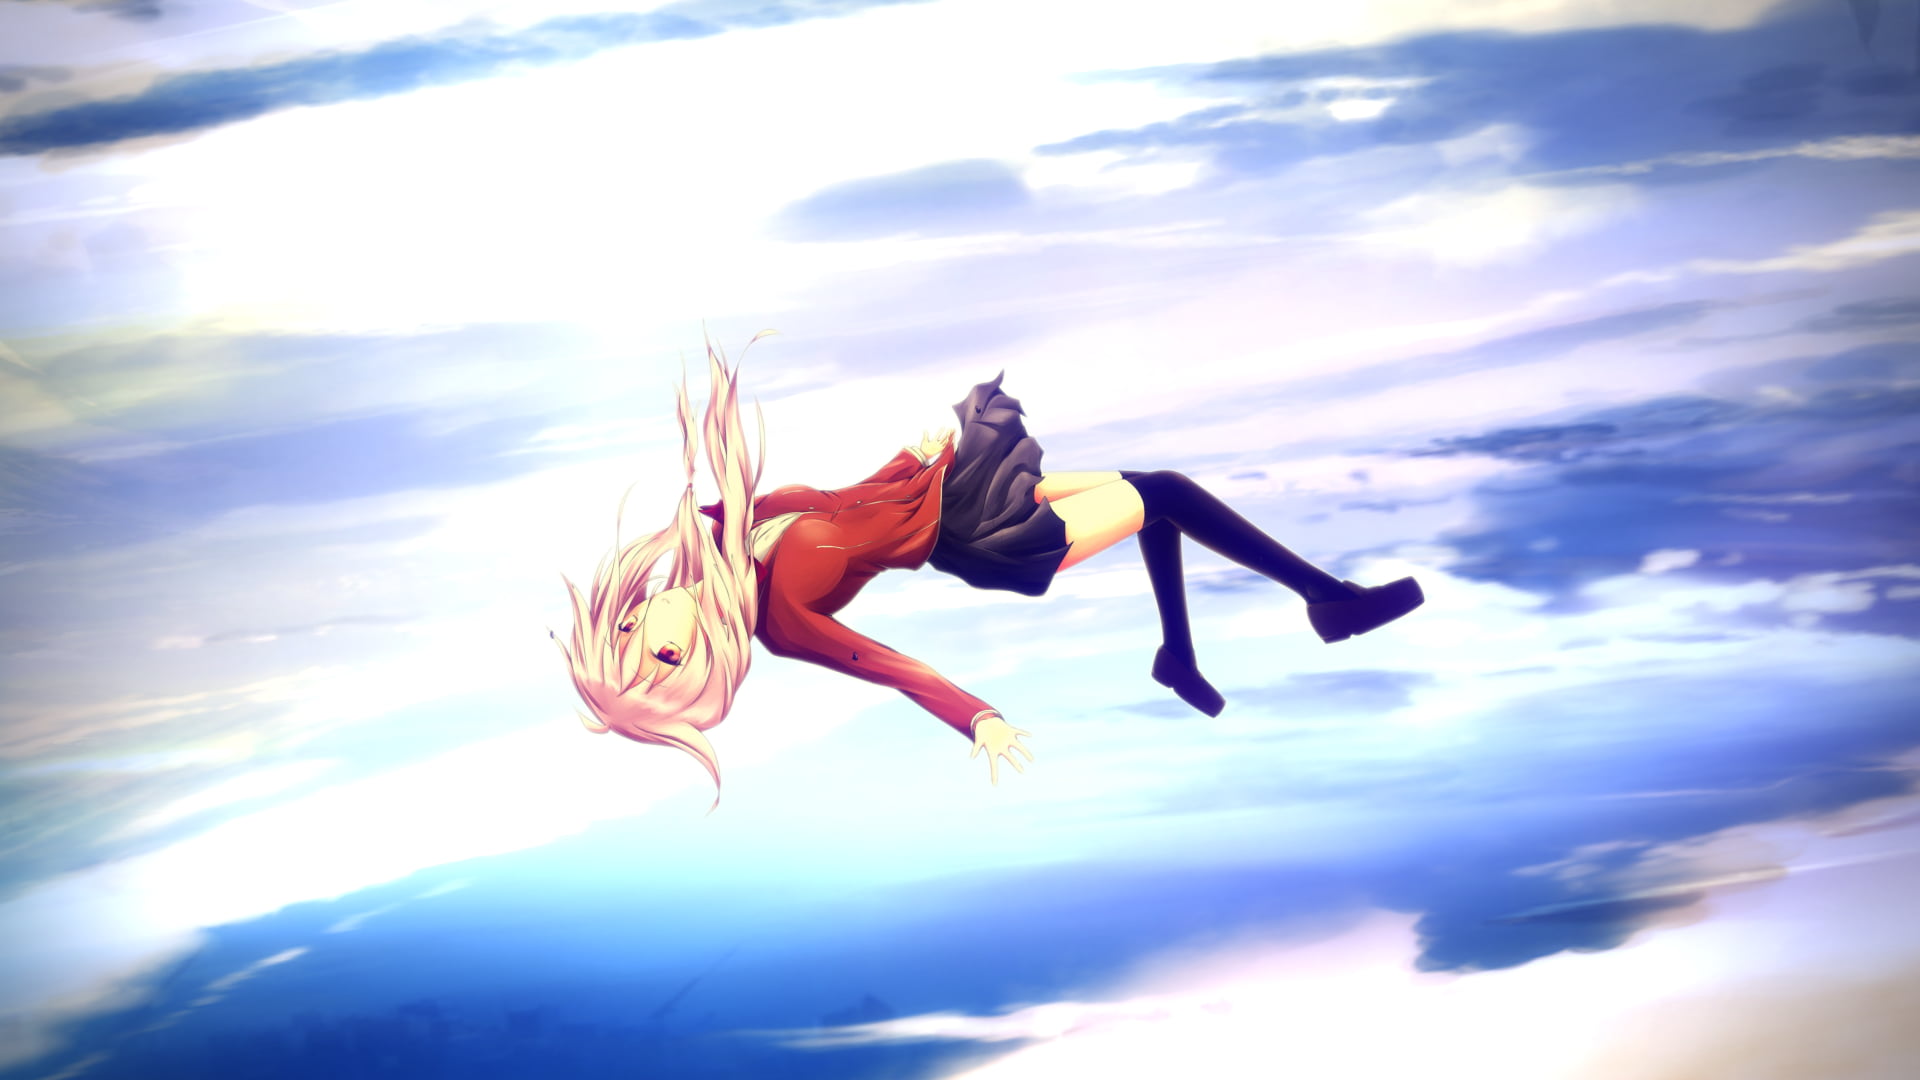 An Anime Character Is Laying Down In The Snow Background, Picture Of  Someone Falling Background Image And Wallpaper for Free Download